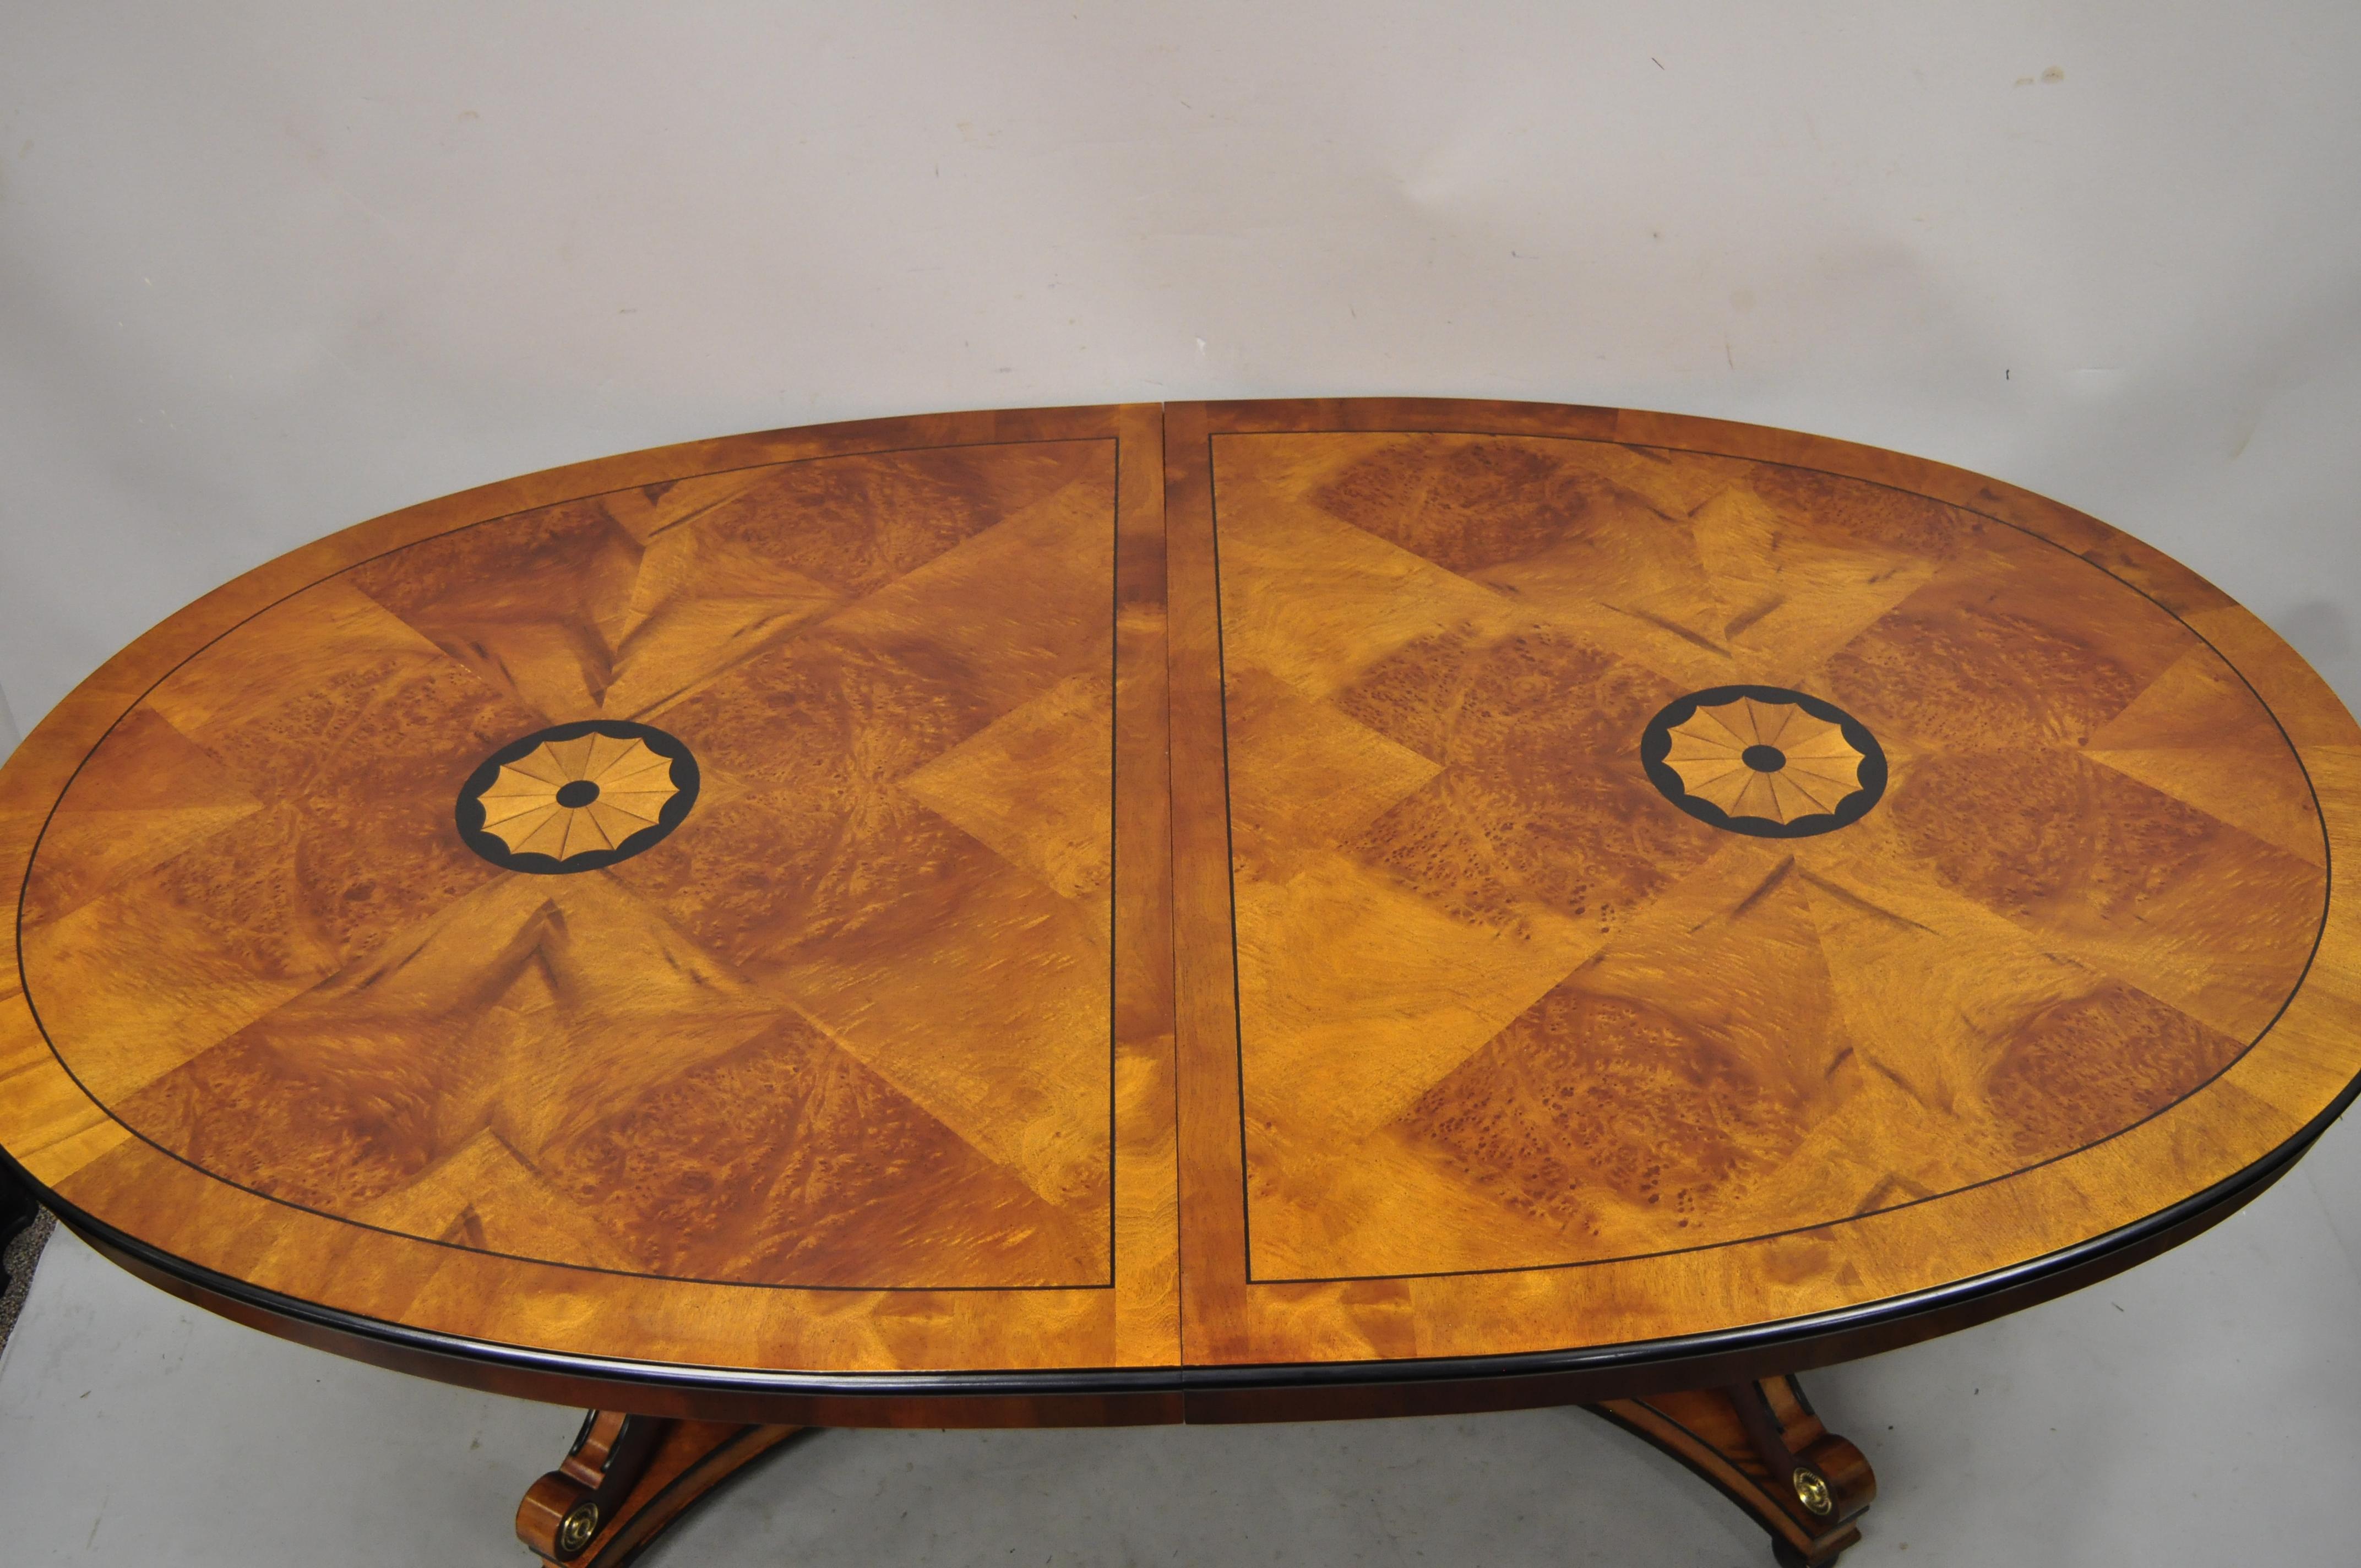 Century Furniture Co. Capuan Collection Biedermier double pedestal base dining table with 2 leaves. Item features (2) 22